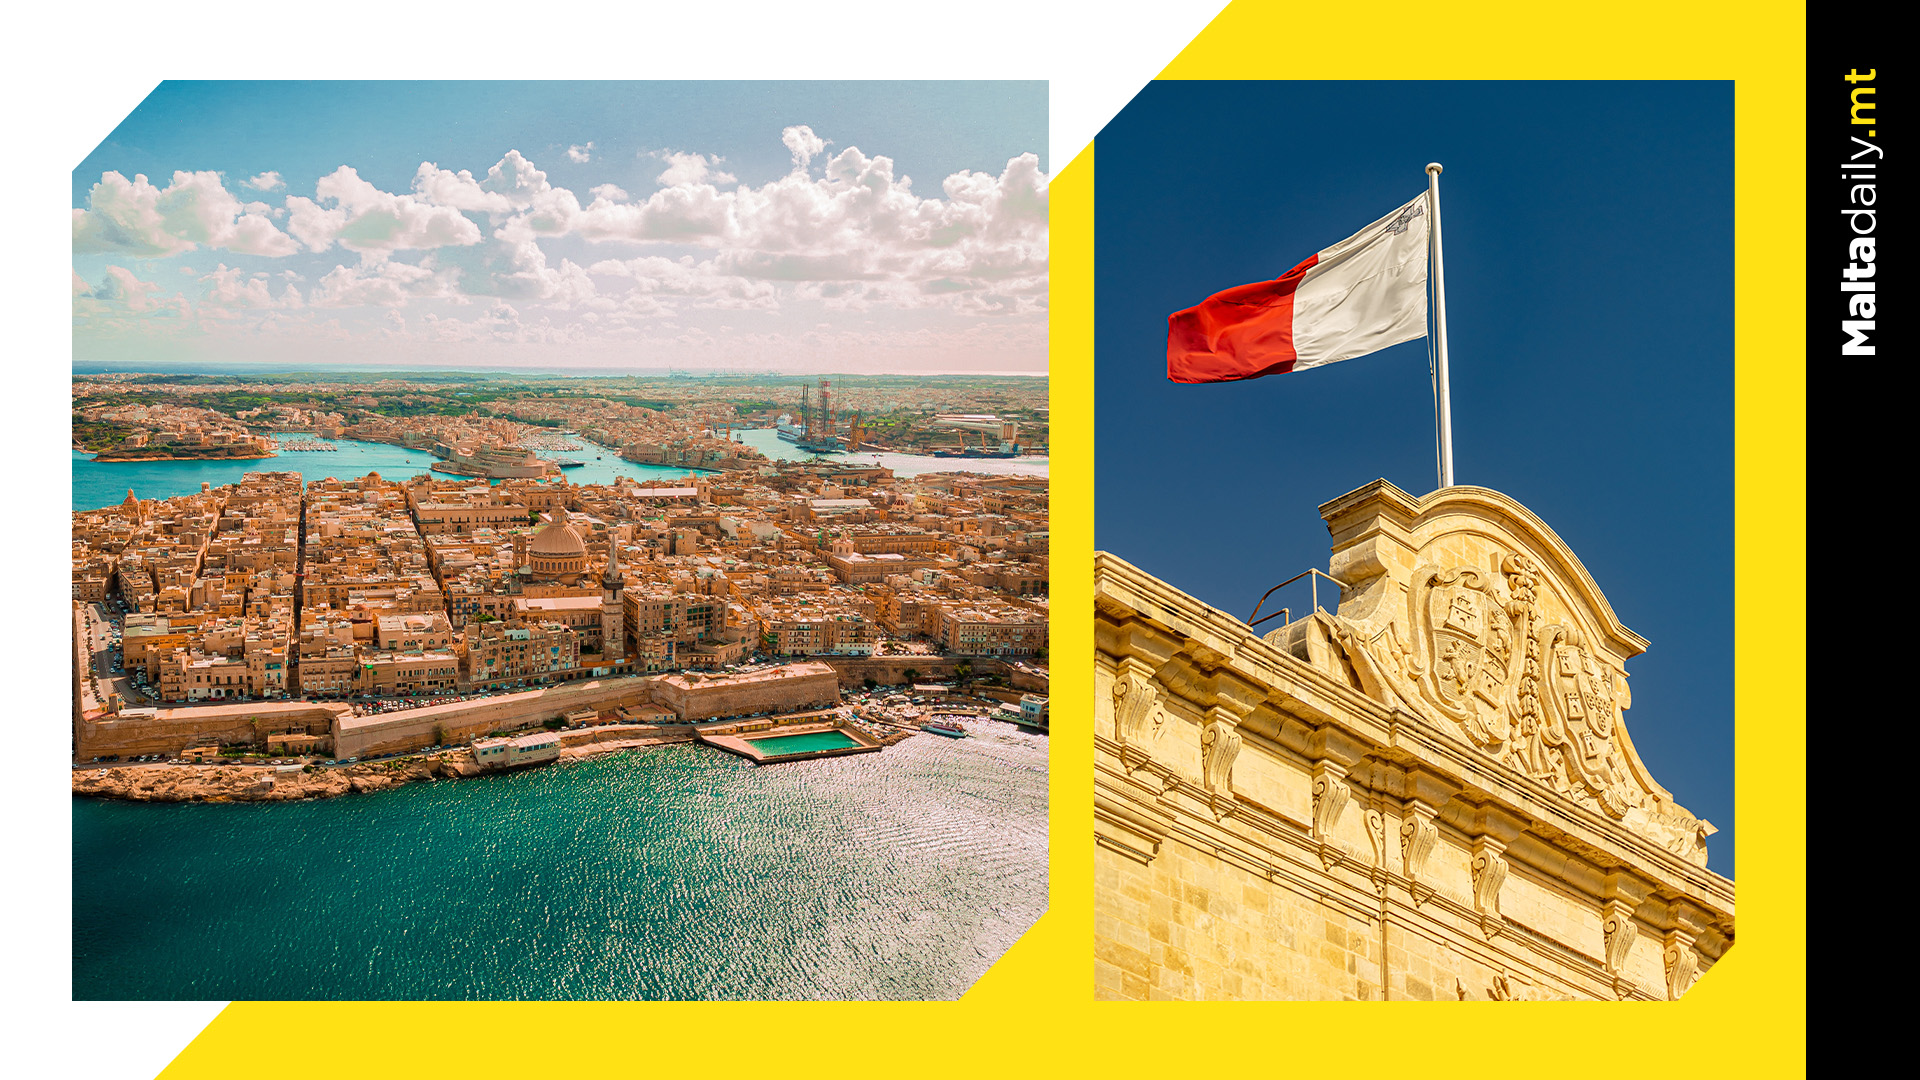 Malta most densely populated EU country with population of 519,562, census reveals